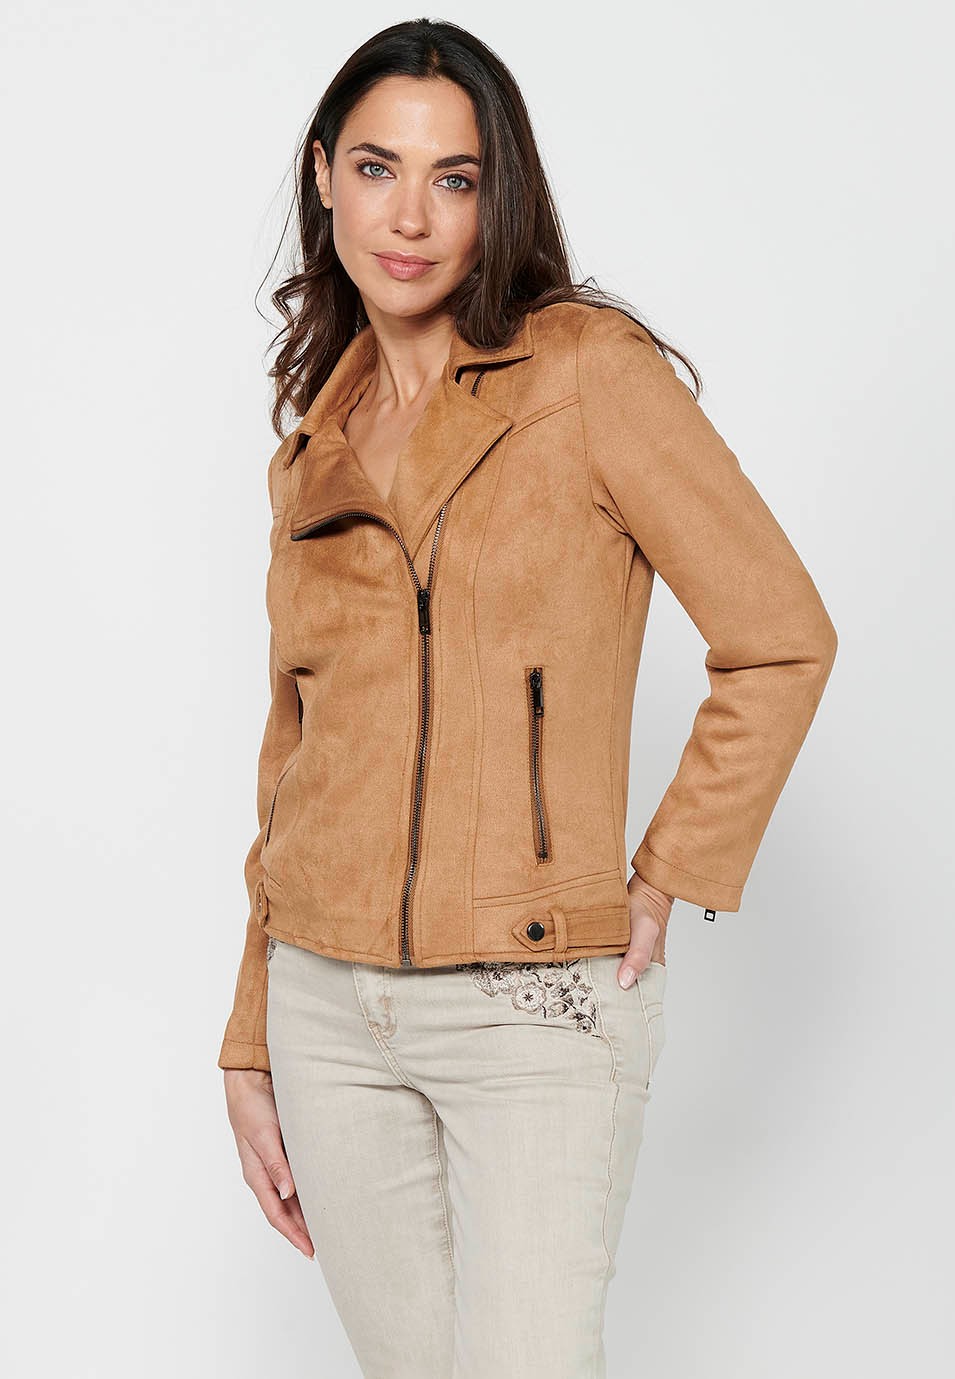 Camel Color Long Sleeve Jacket with Cross-Zip Closure with Lapel Collar and Pockets for Women 11